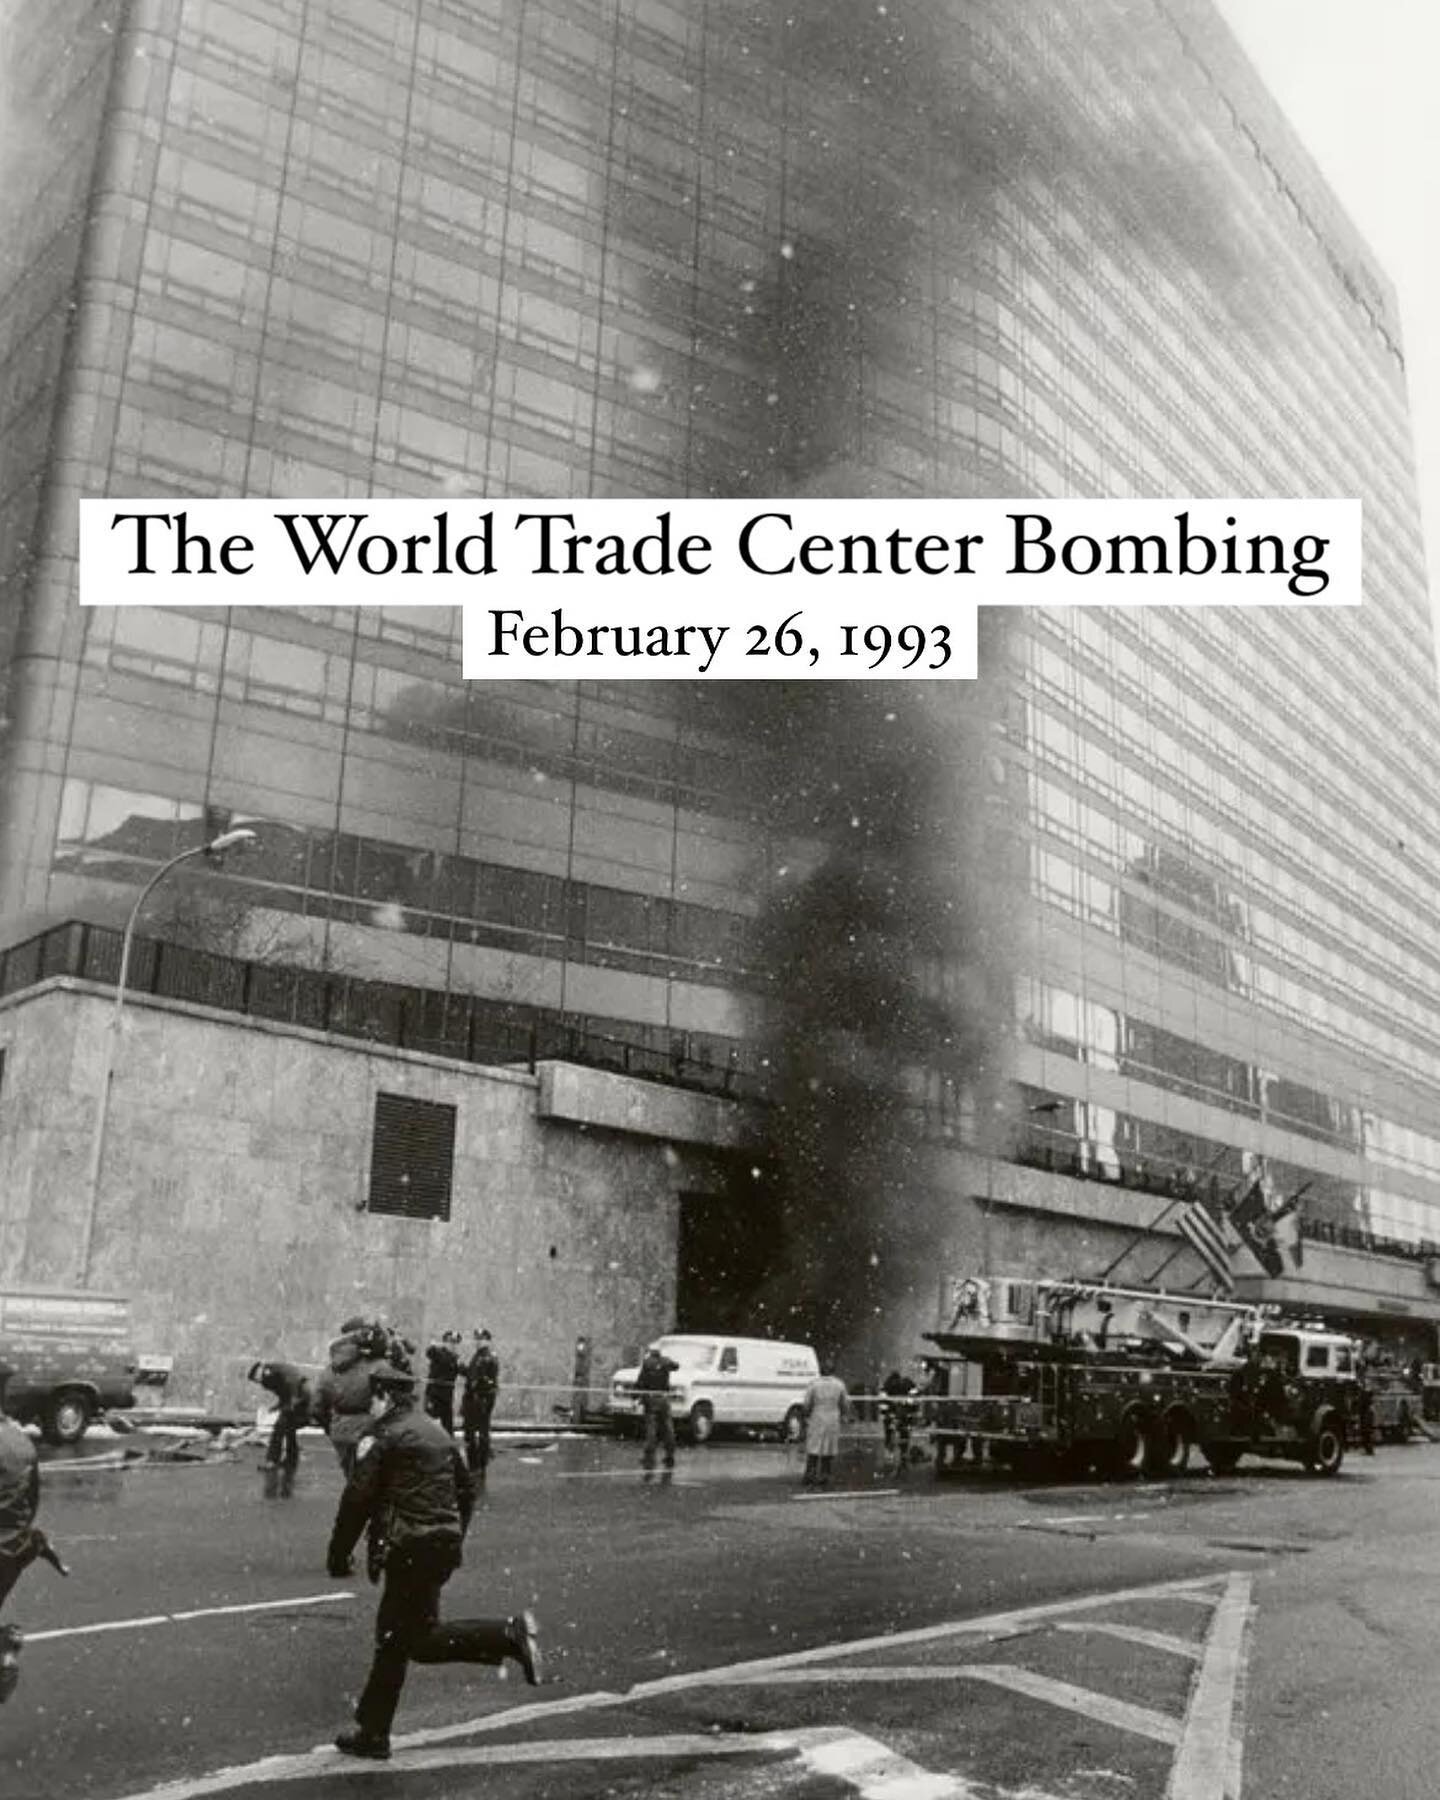 It was just after noon on Friday, February 26, 1993. Roughly 50,000 people were working in the twin 110-story towers of the World Trade Center in lower Manhattan. Below ground, two men parked a Ryder moving van on the B-2 parking level. Inside the va